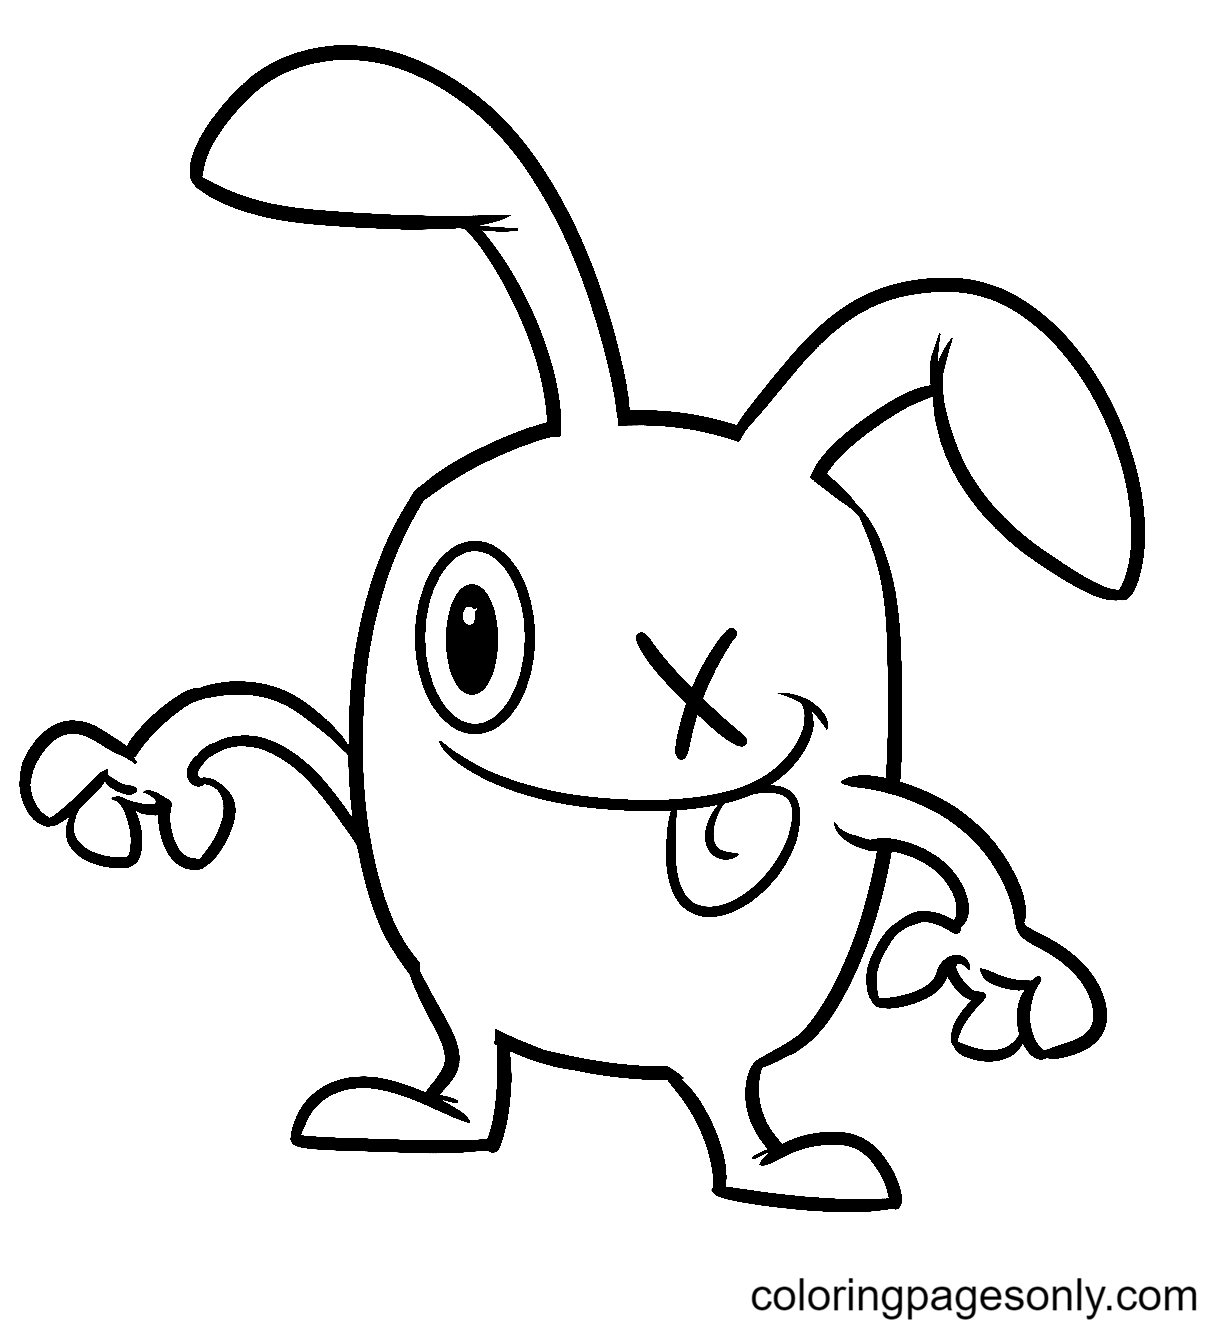 Cute Ox Uglydolls Coloring Page